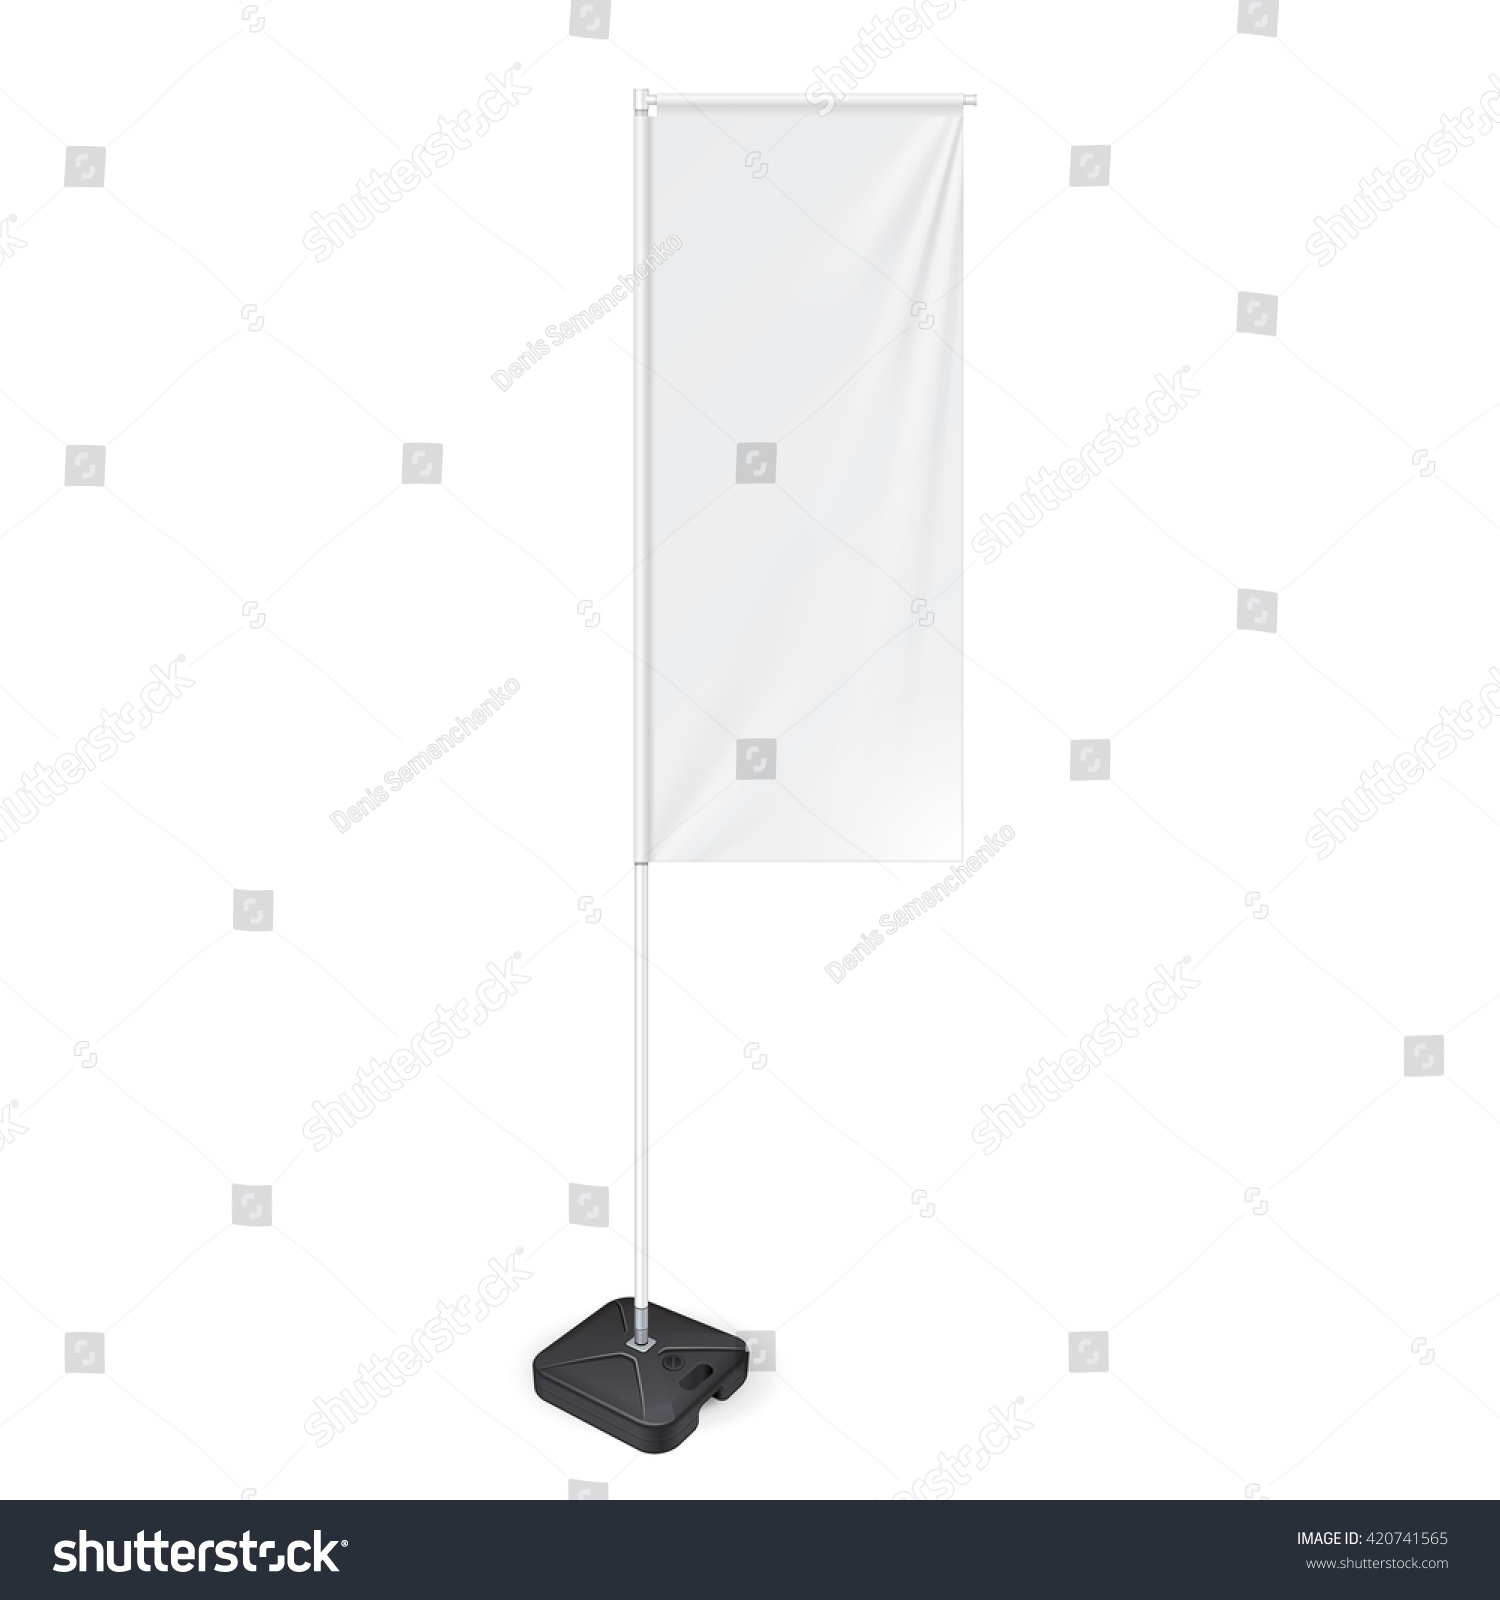 White Outdoor Panel Flag With Ground Fillable Water Base, Stander Advertising Banner Shield. Mock Up Products On White Background Isolated. Ready For Your Design. Product Packing. Vector EPS10 #420741565